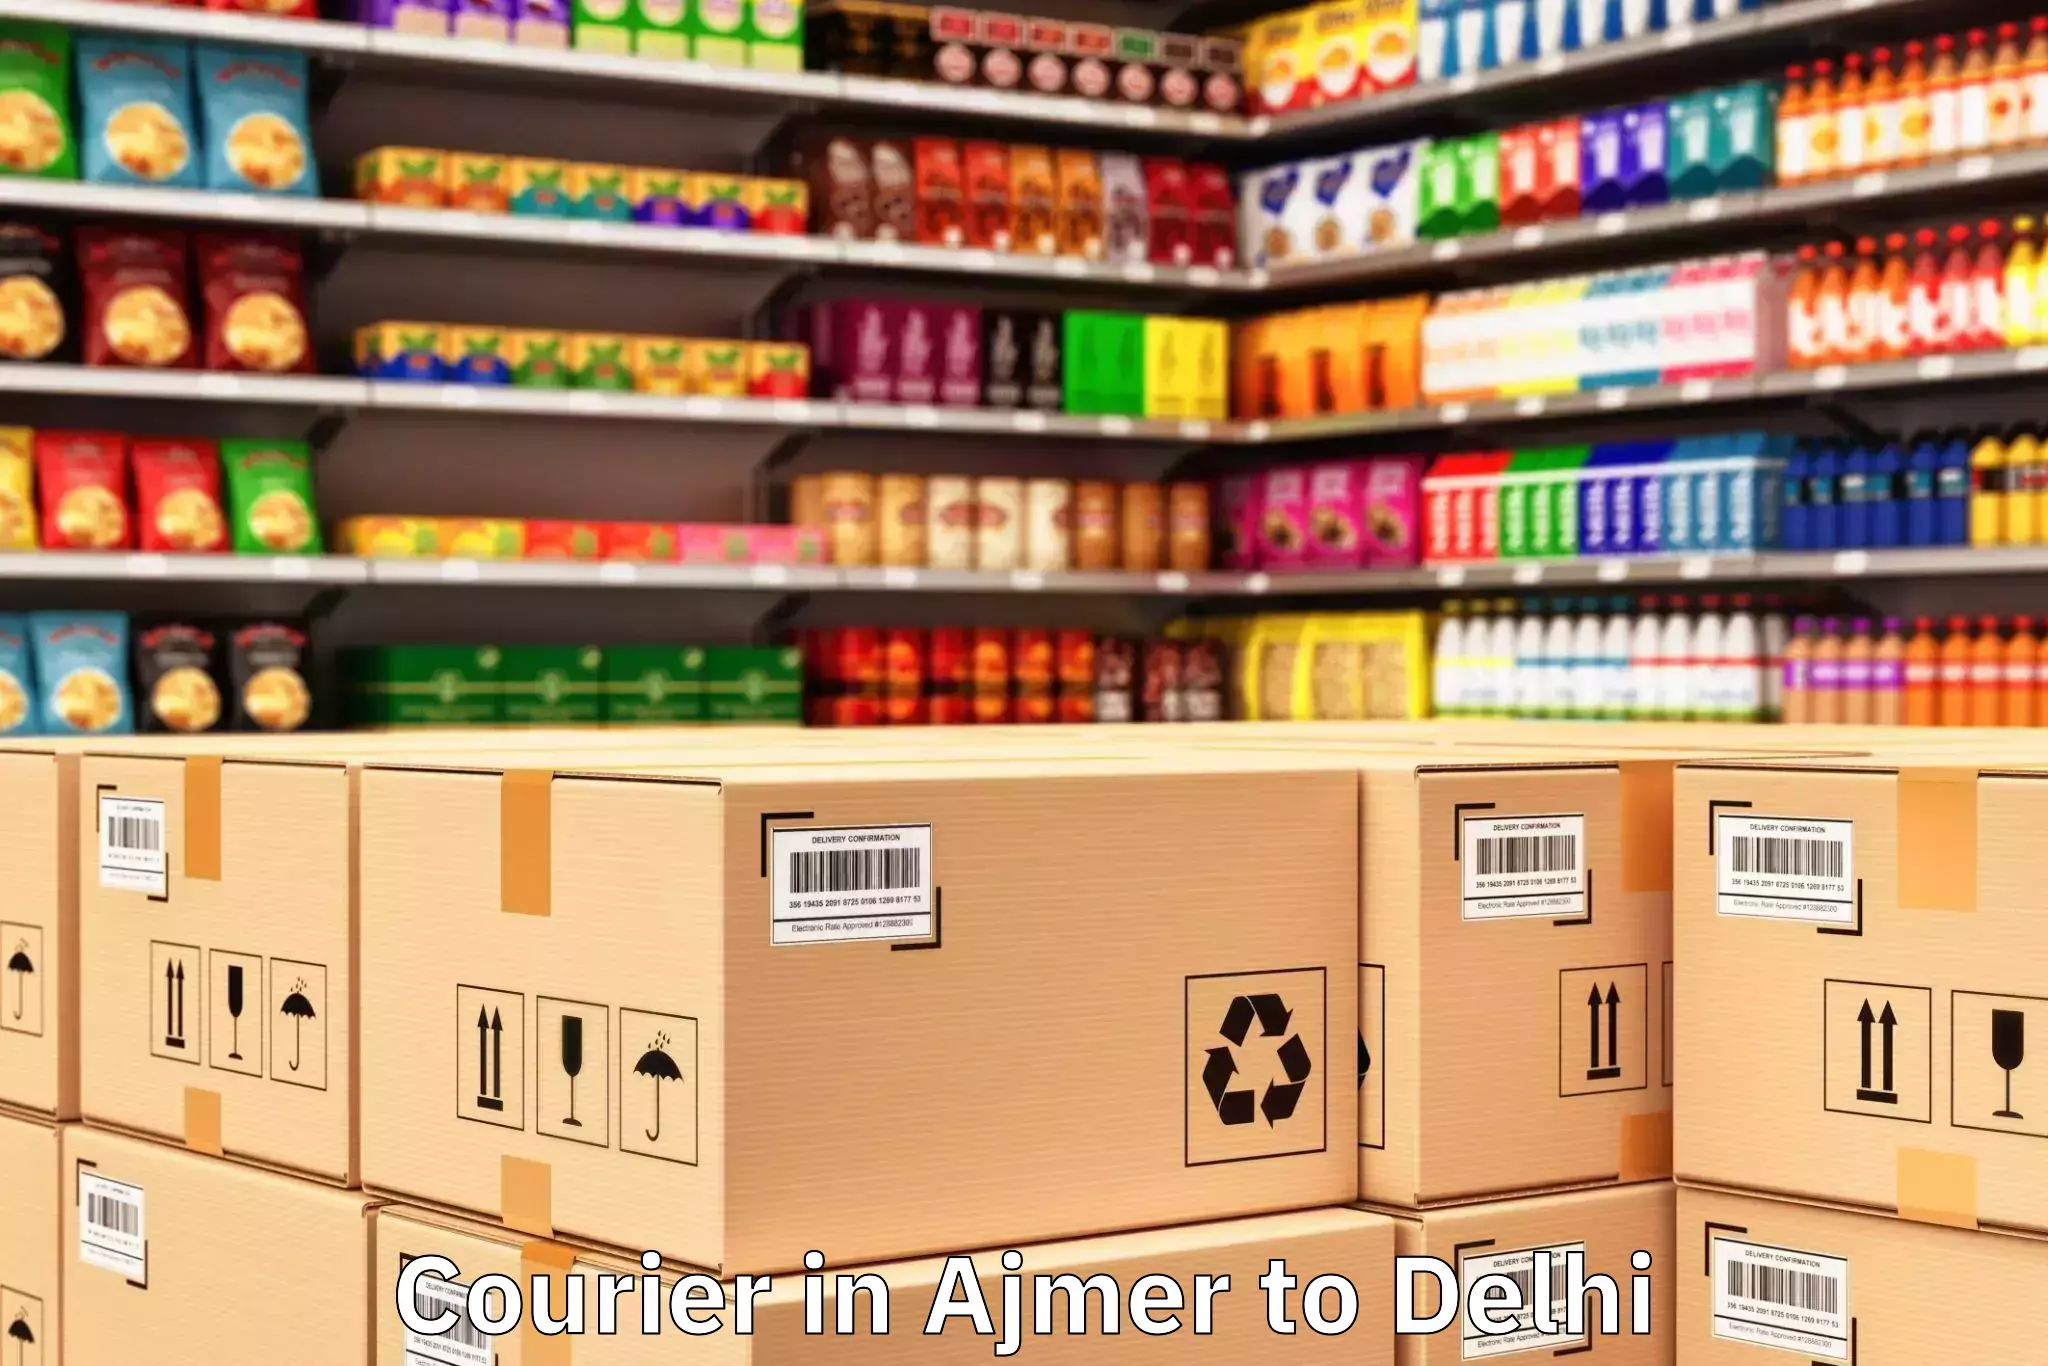 Reliable Ajmer to The Chanakya Mall Courier